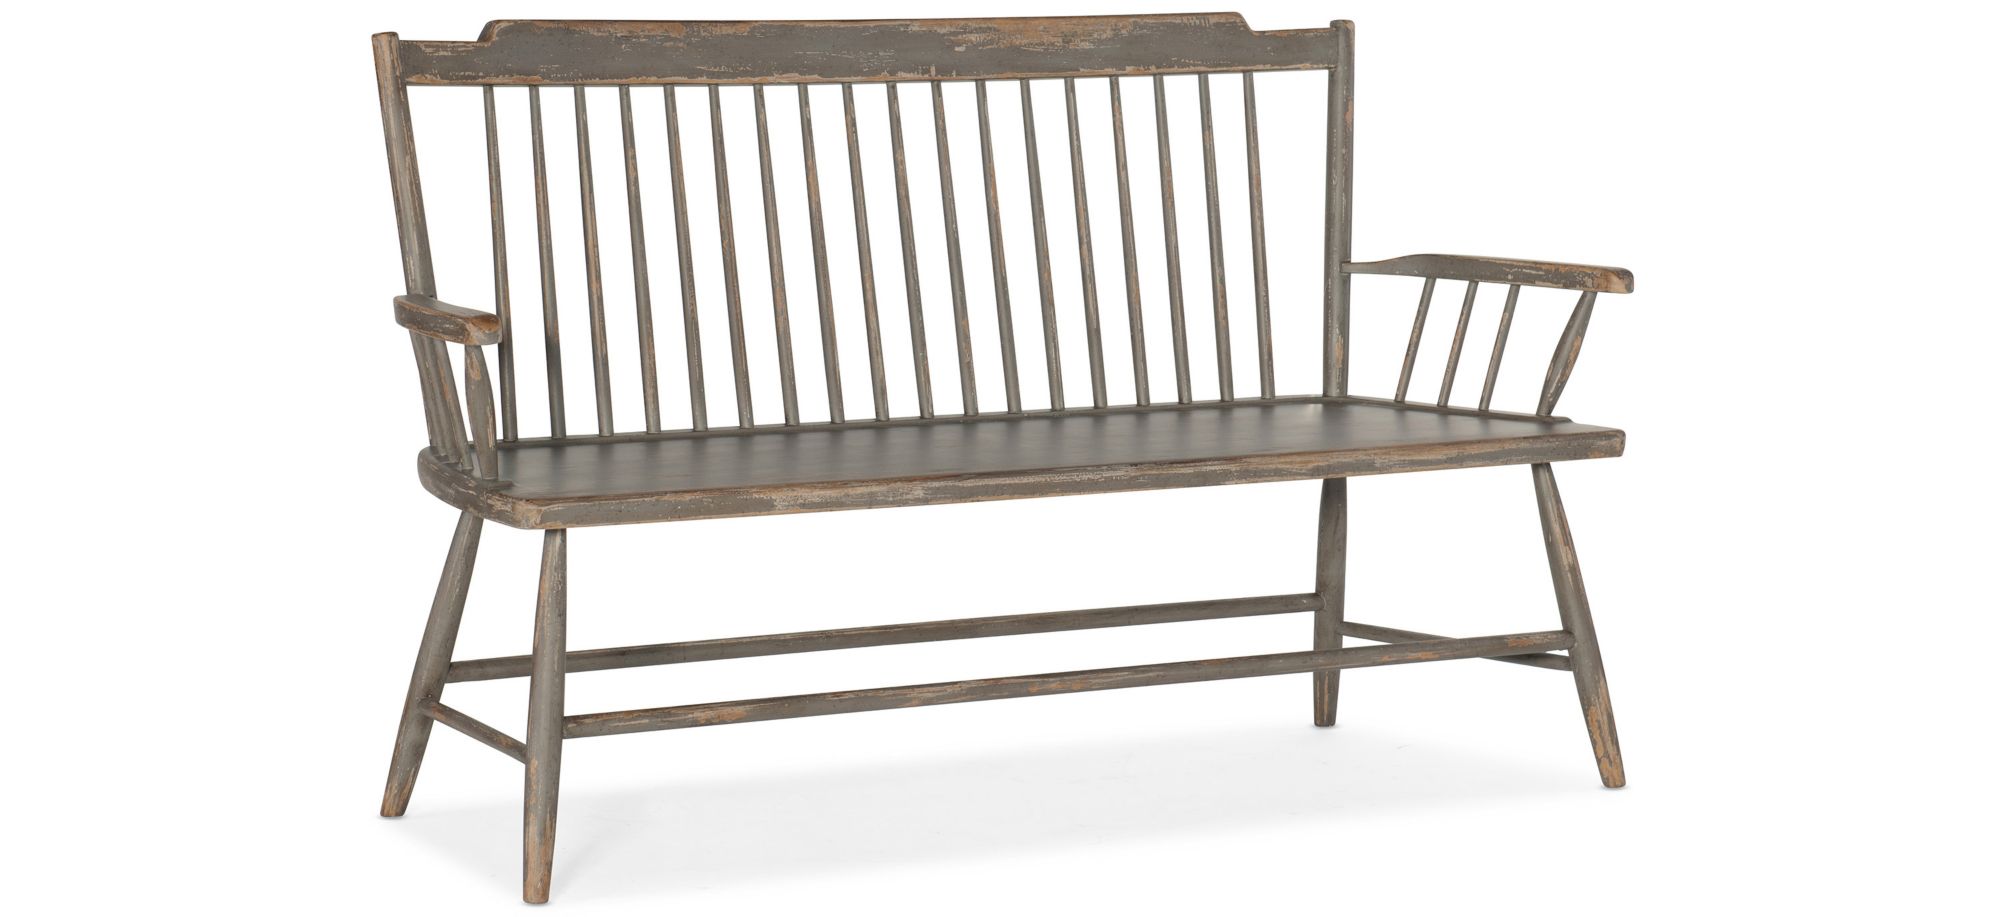 Alfresco Dining Bench in Pottery by Hooker Furniture